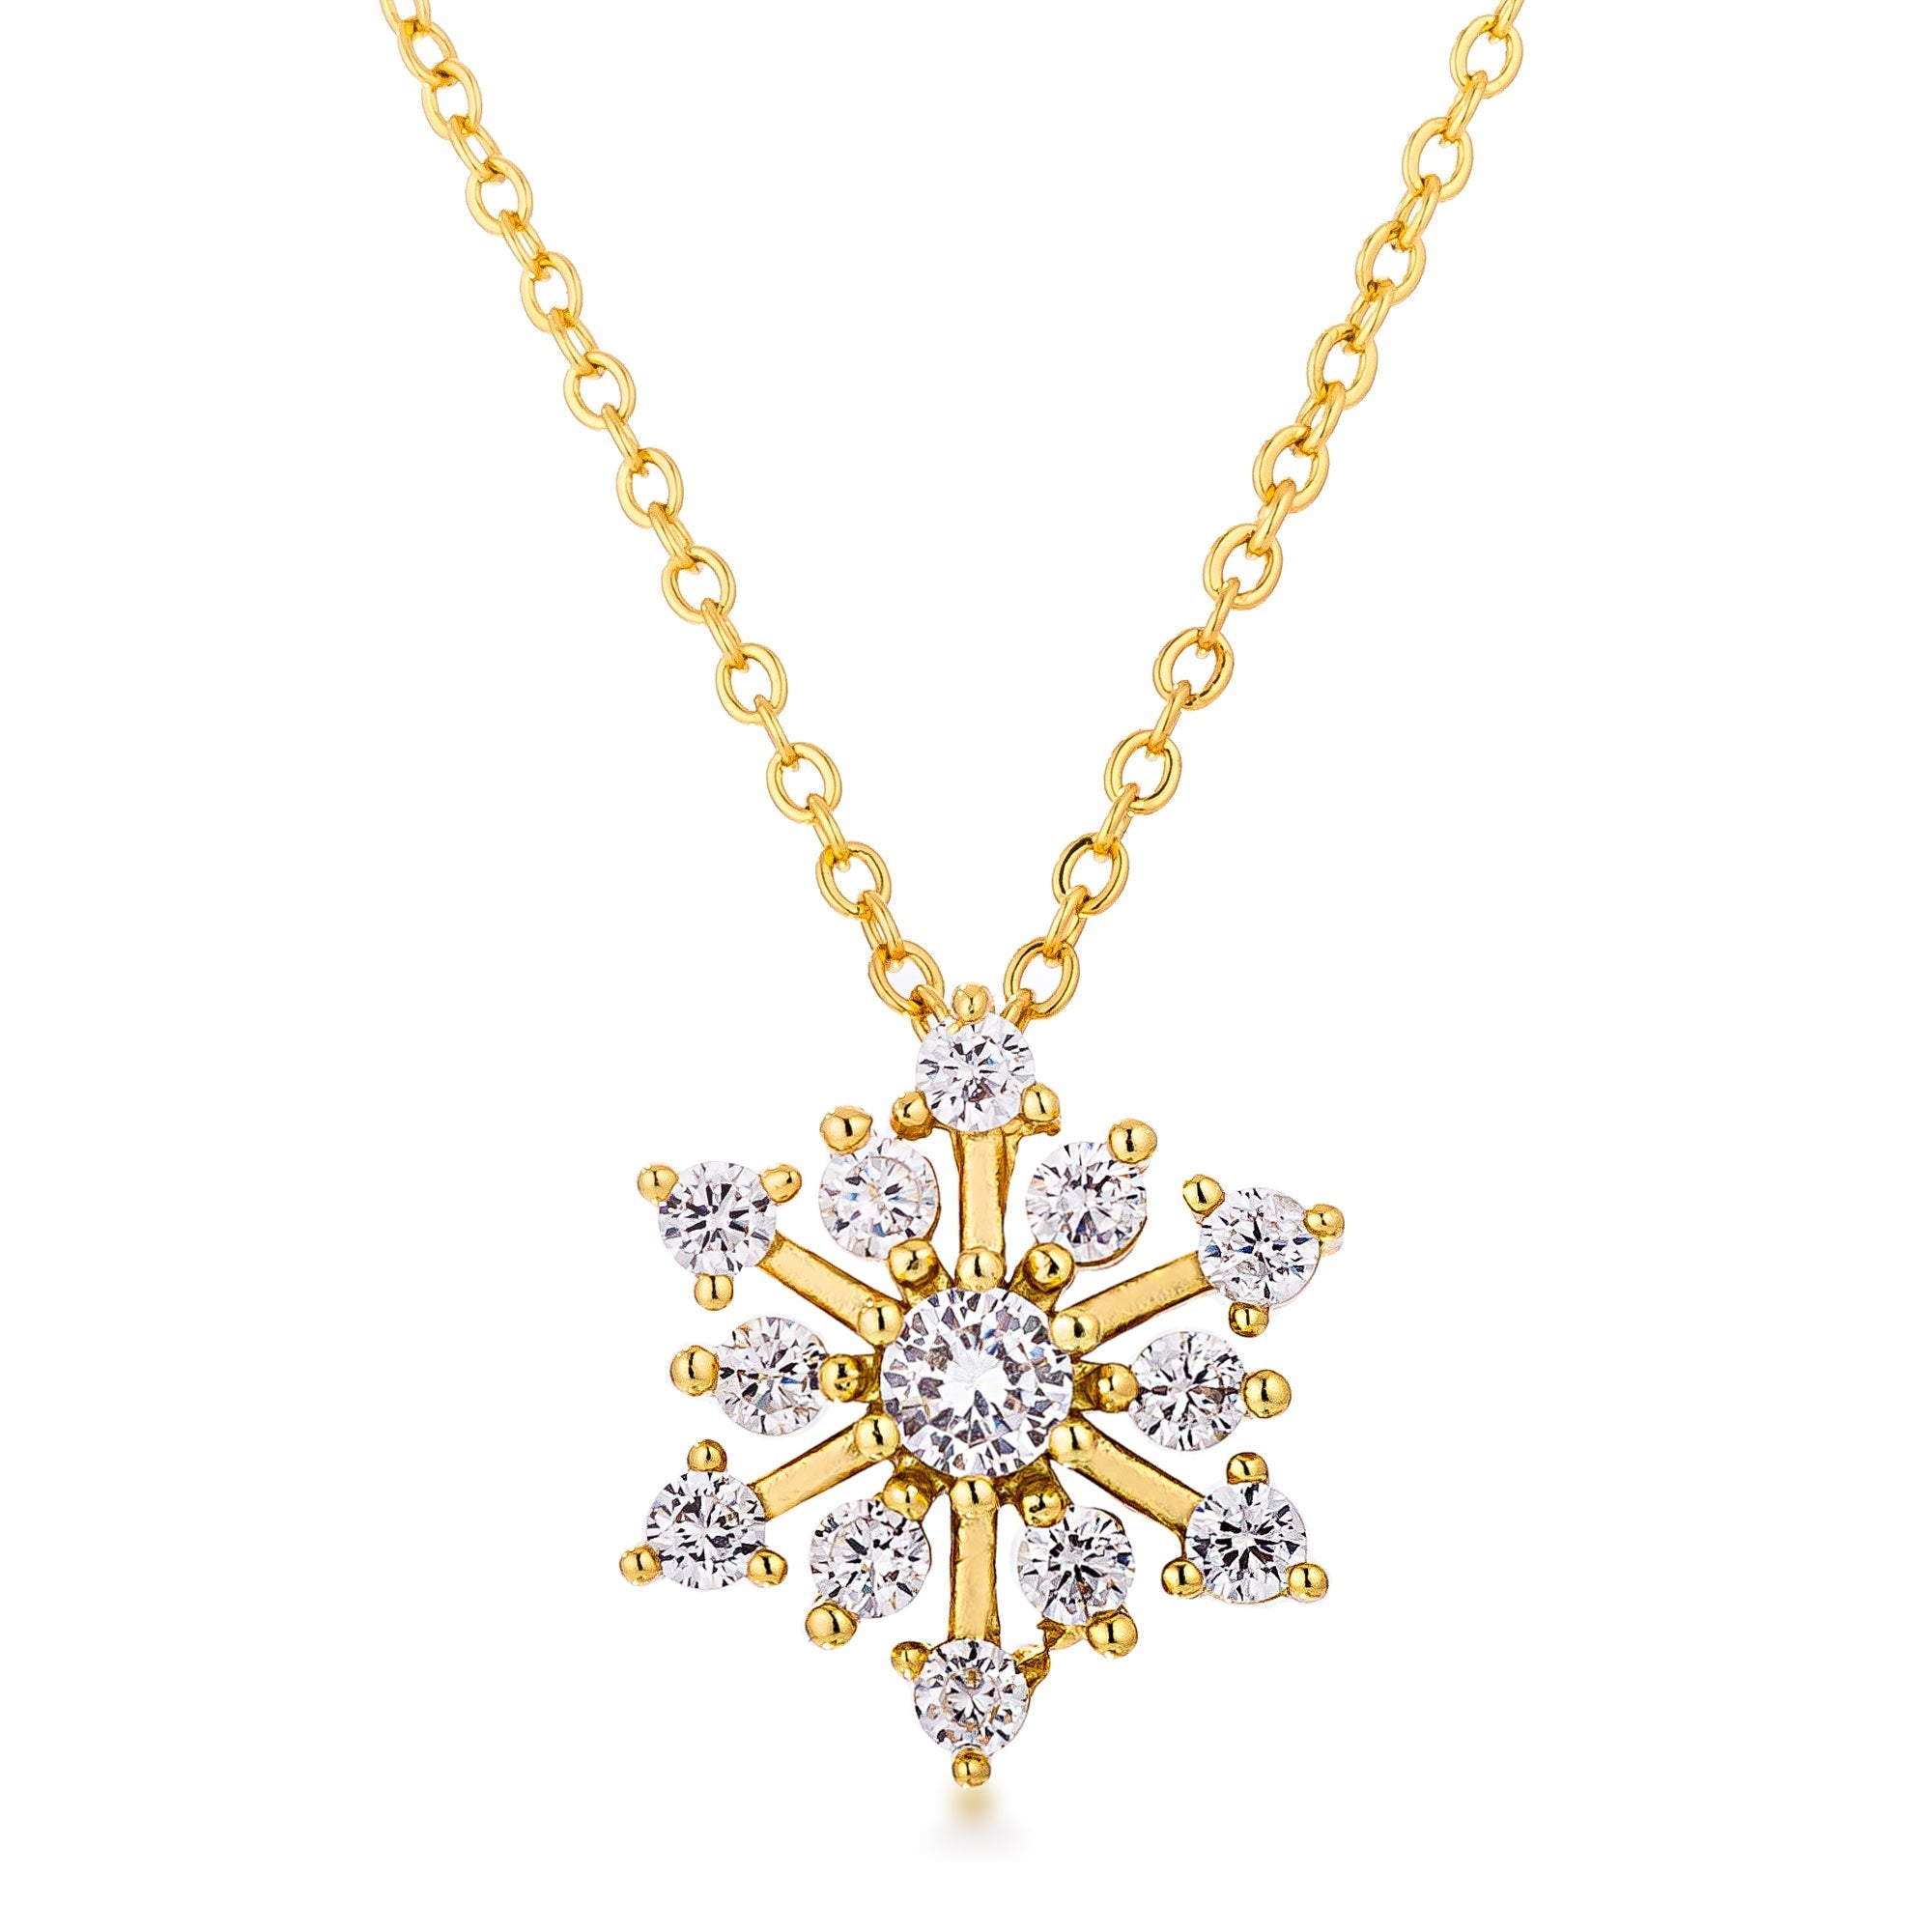 Contemporary Gold Plated CZ Snowflake Necklace - LinkagejewelrydesignLinkagejewelrydesign